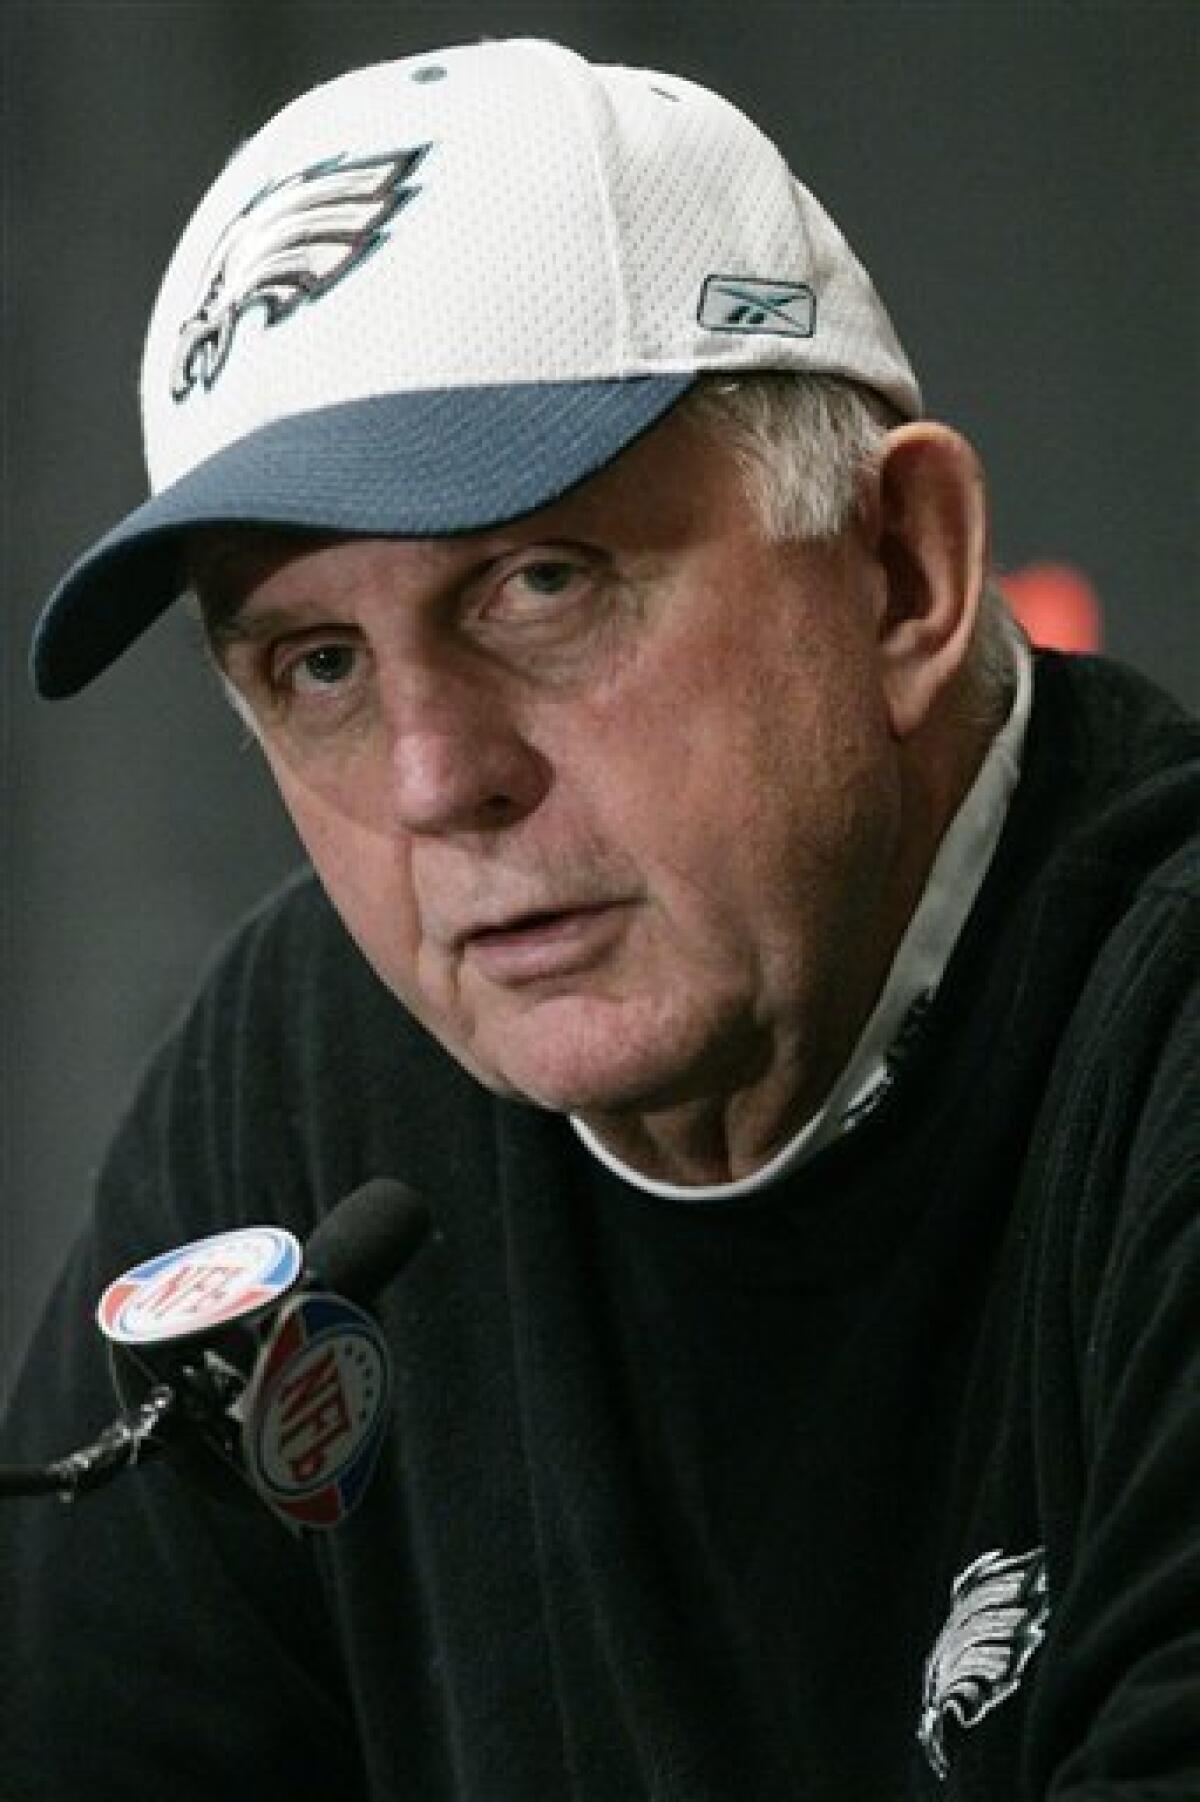 FILE - In this Oct. 18, 2007 file photo, Philadelphia Eagles football defensive coordinator Jim Johnson makes remarks during a news conference in Philadelphia. Sean McDermott has replaced Jim Johnson as the Philadelphia Eagles defensive coordinator, two days before the team opens training camp. The 68-year-old Johnson took an indefinite leave of absence in May to continue treatment for a cancerous tumor on his spine. (AP Photo/Matt Rourke, File)